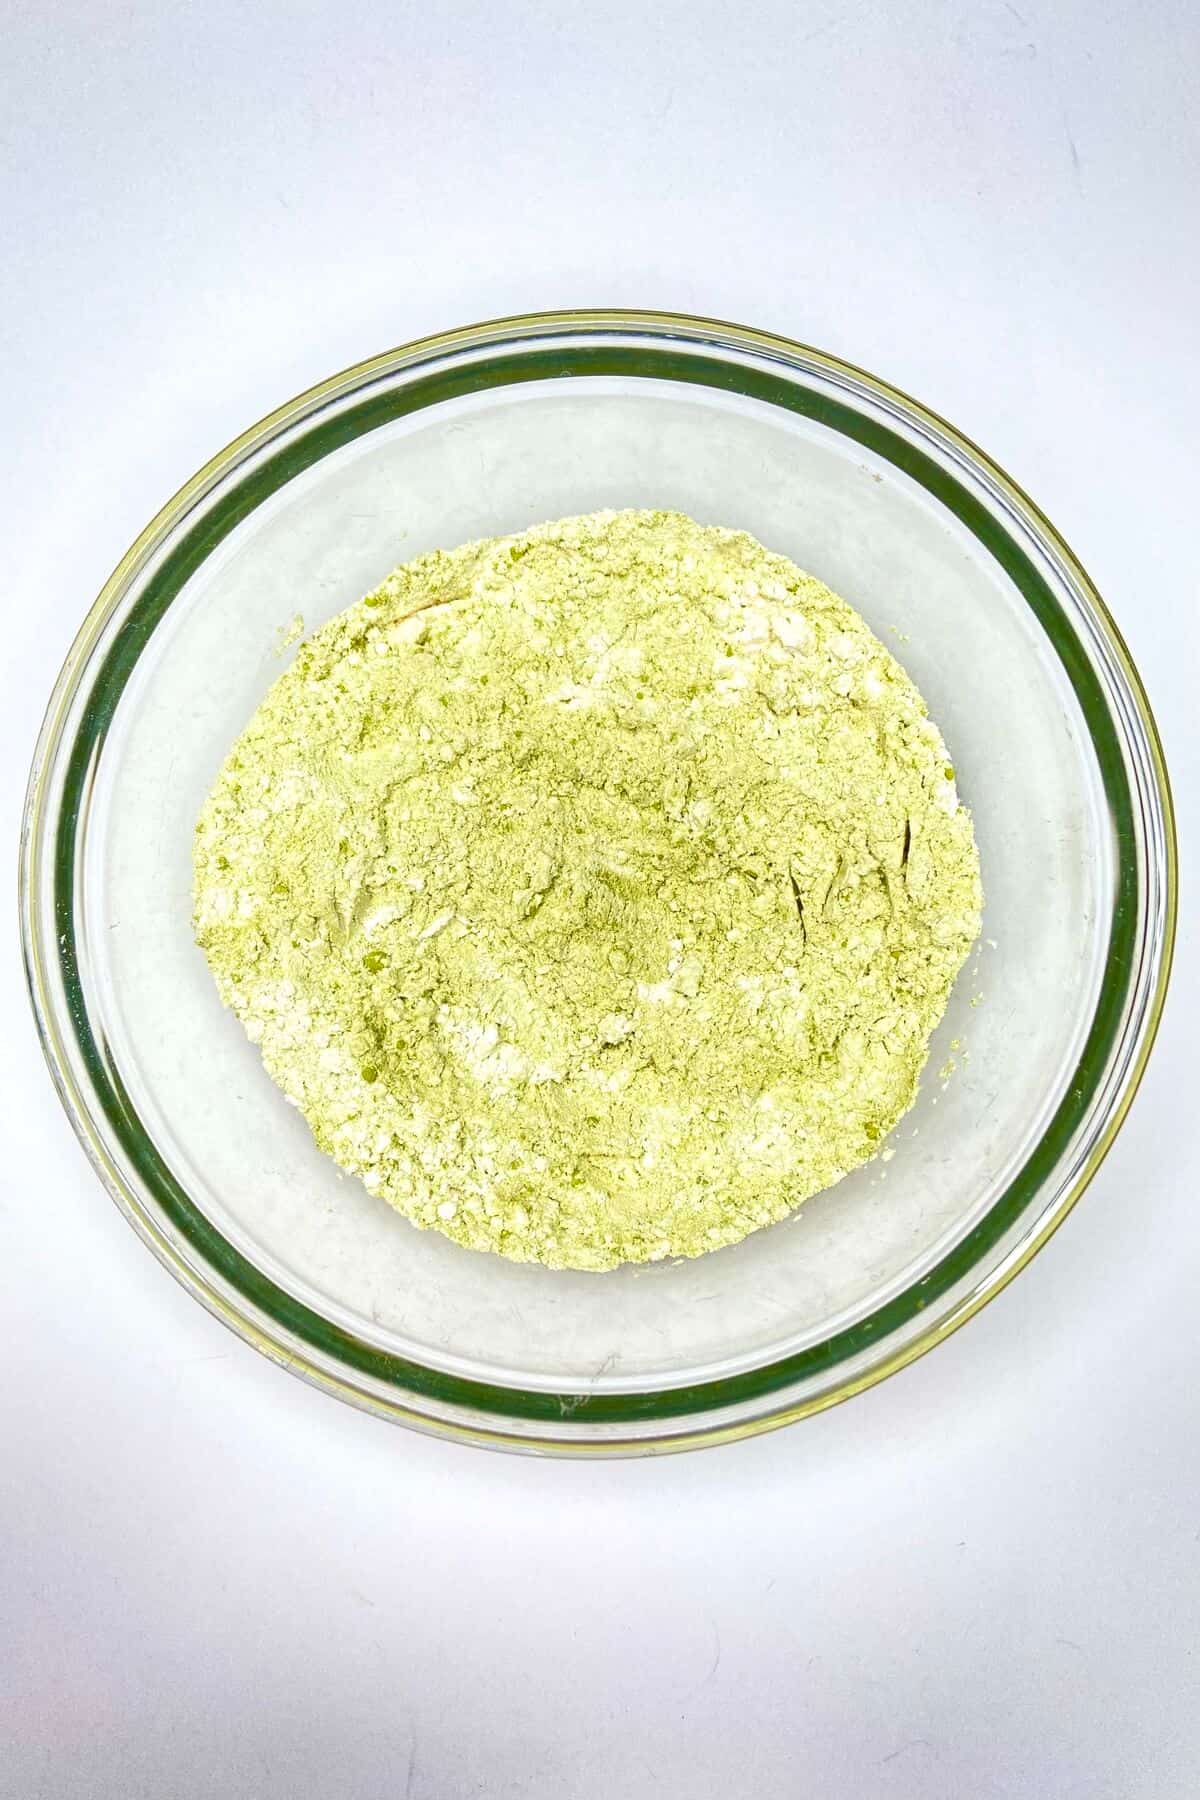 Flour, matcha powder, and baking powder mixed together in a glass bowl.